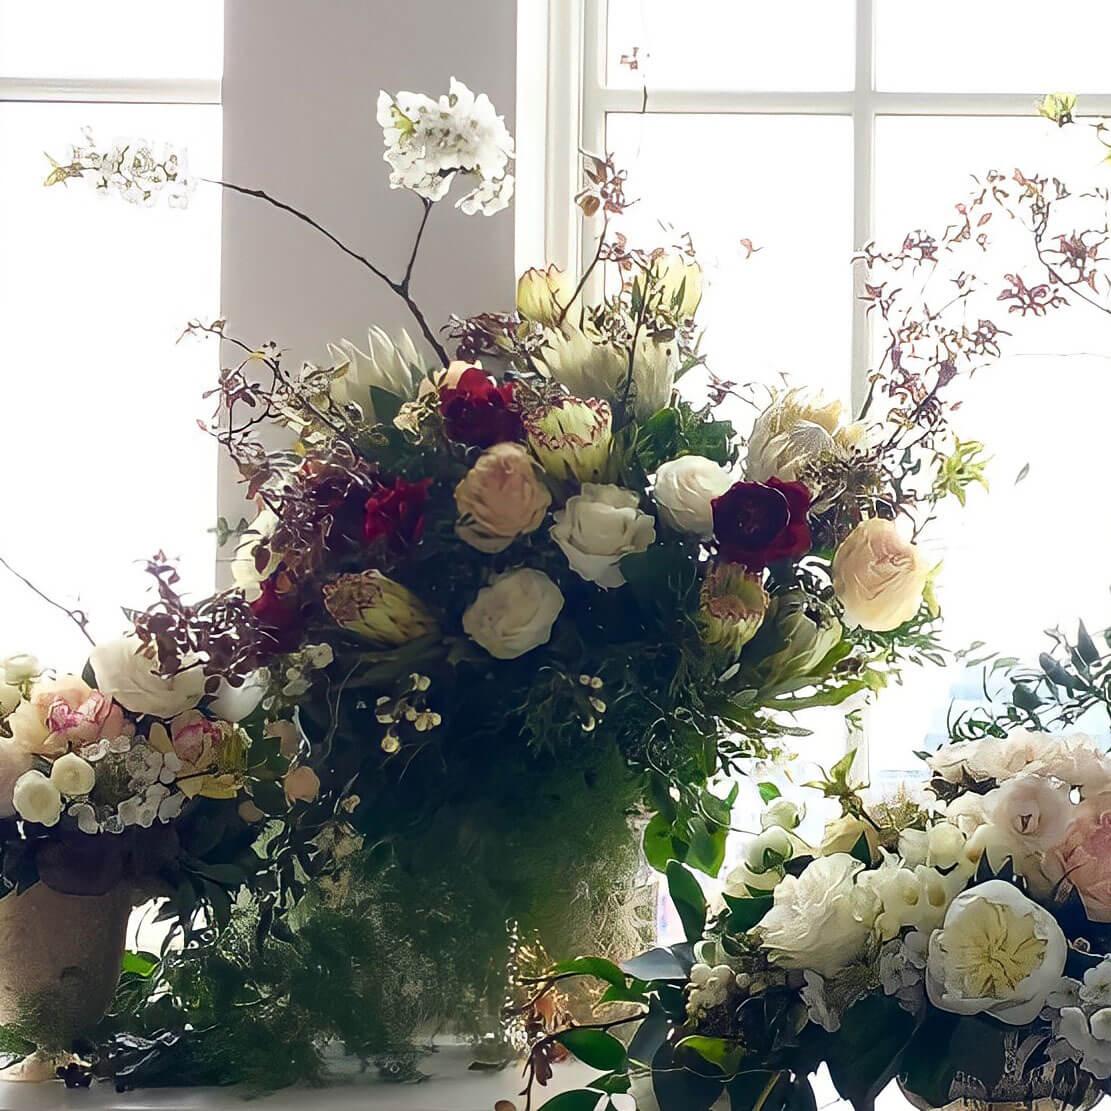 A beautiful arrangement of various flowers in a golden vase, placed on a white pedestal against a window, creating a serene and elegant atmosphere. Order online for sympathy & event flowers from the best florist in Toronto near you.